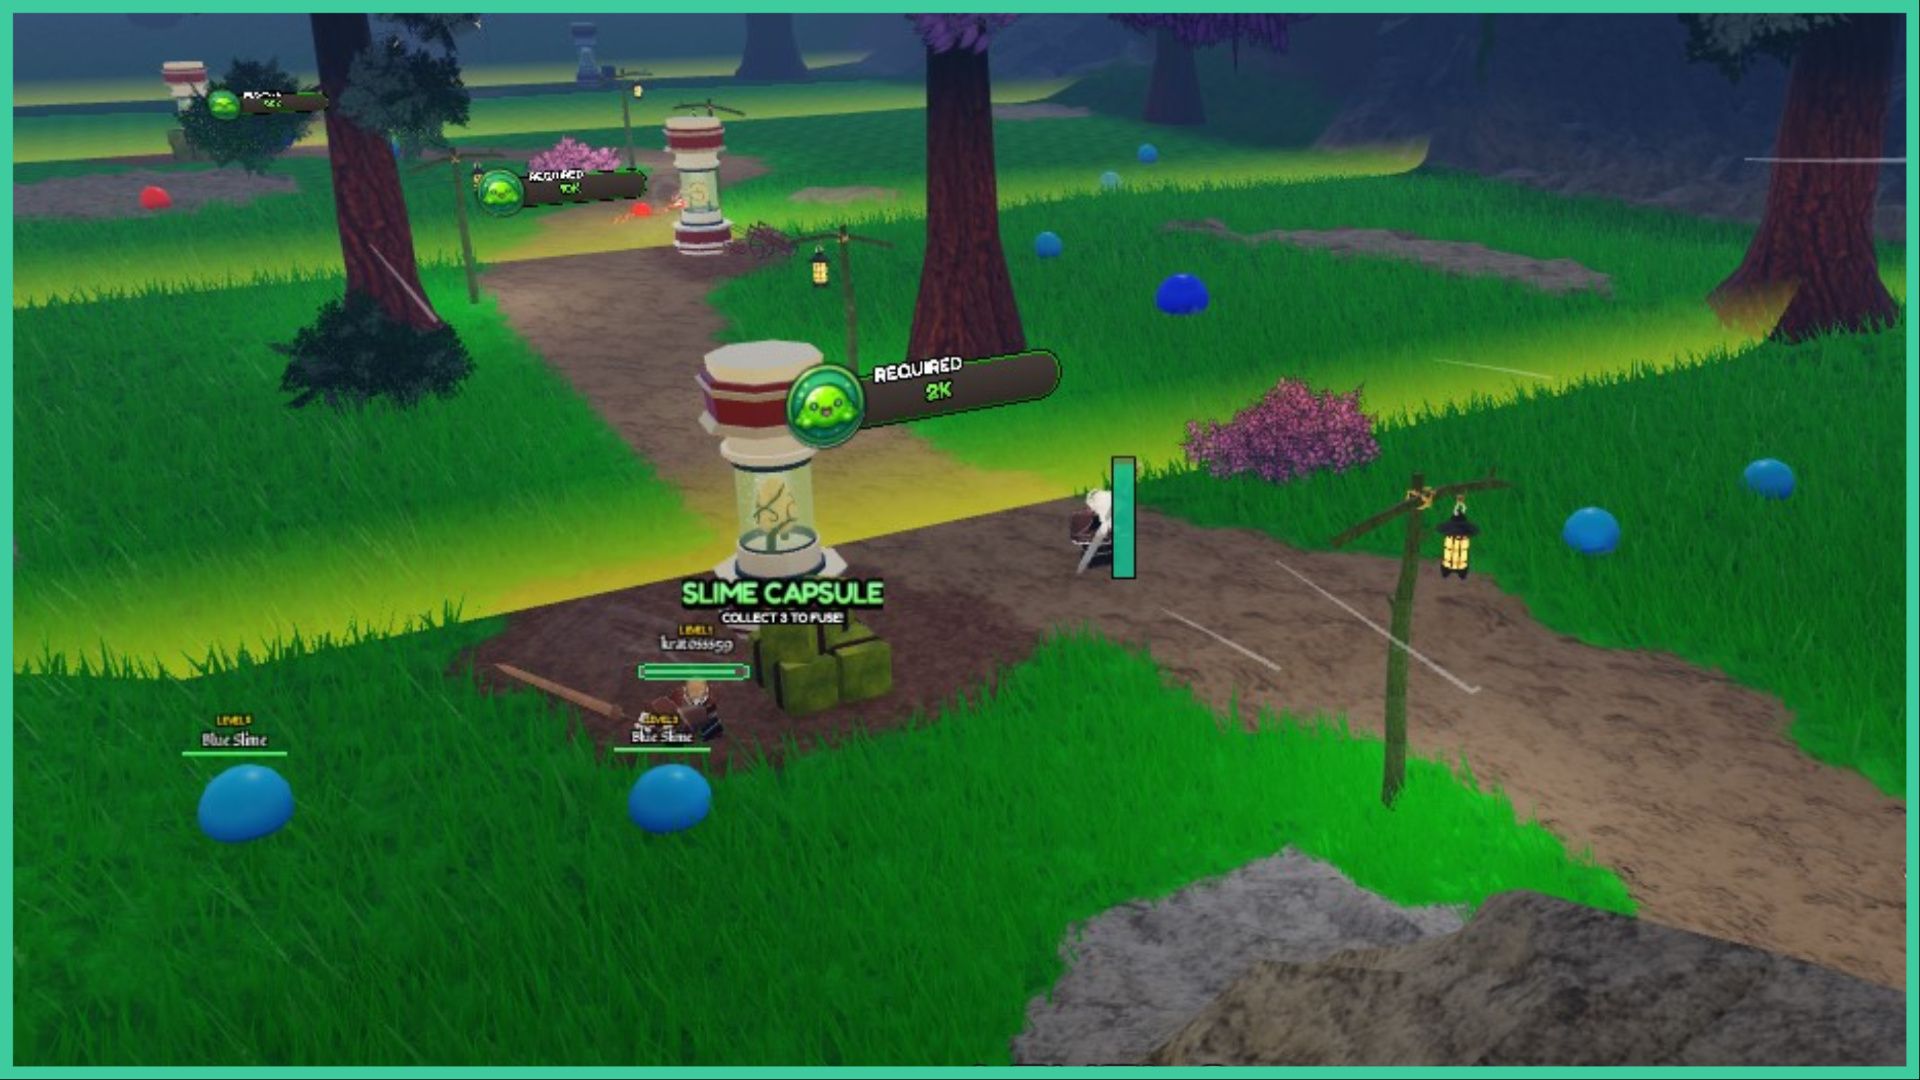 feature image for our slime slaying simulator codes guide, the image is a screenshot from the slime forest area as multiple blue slime wander around the grass with a strange capsule with a slime egg inside of it, there are locked areas ahead with more slimes and trees